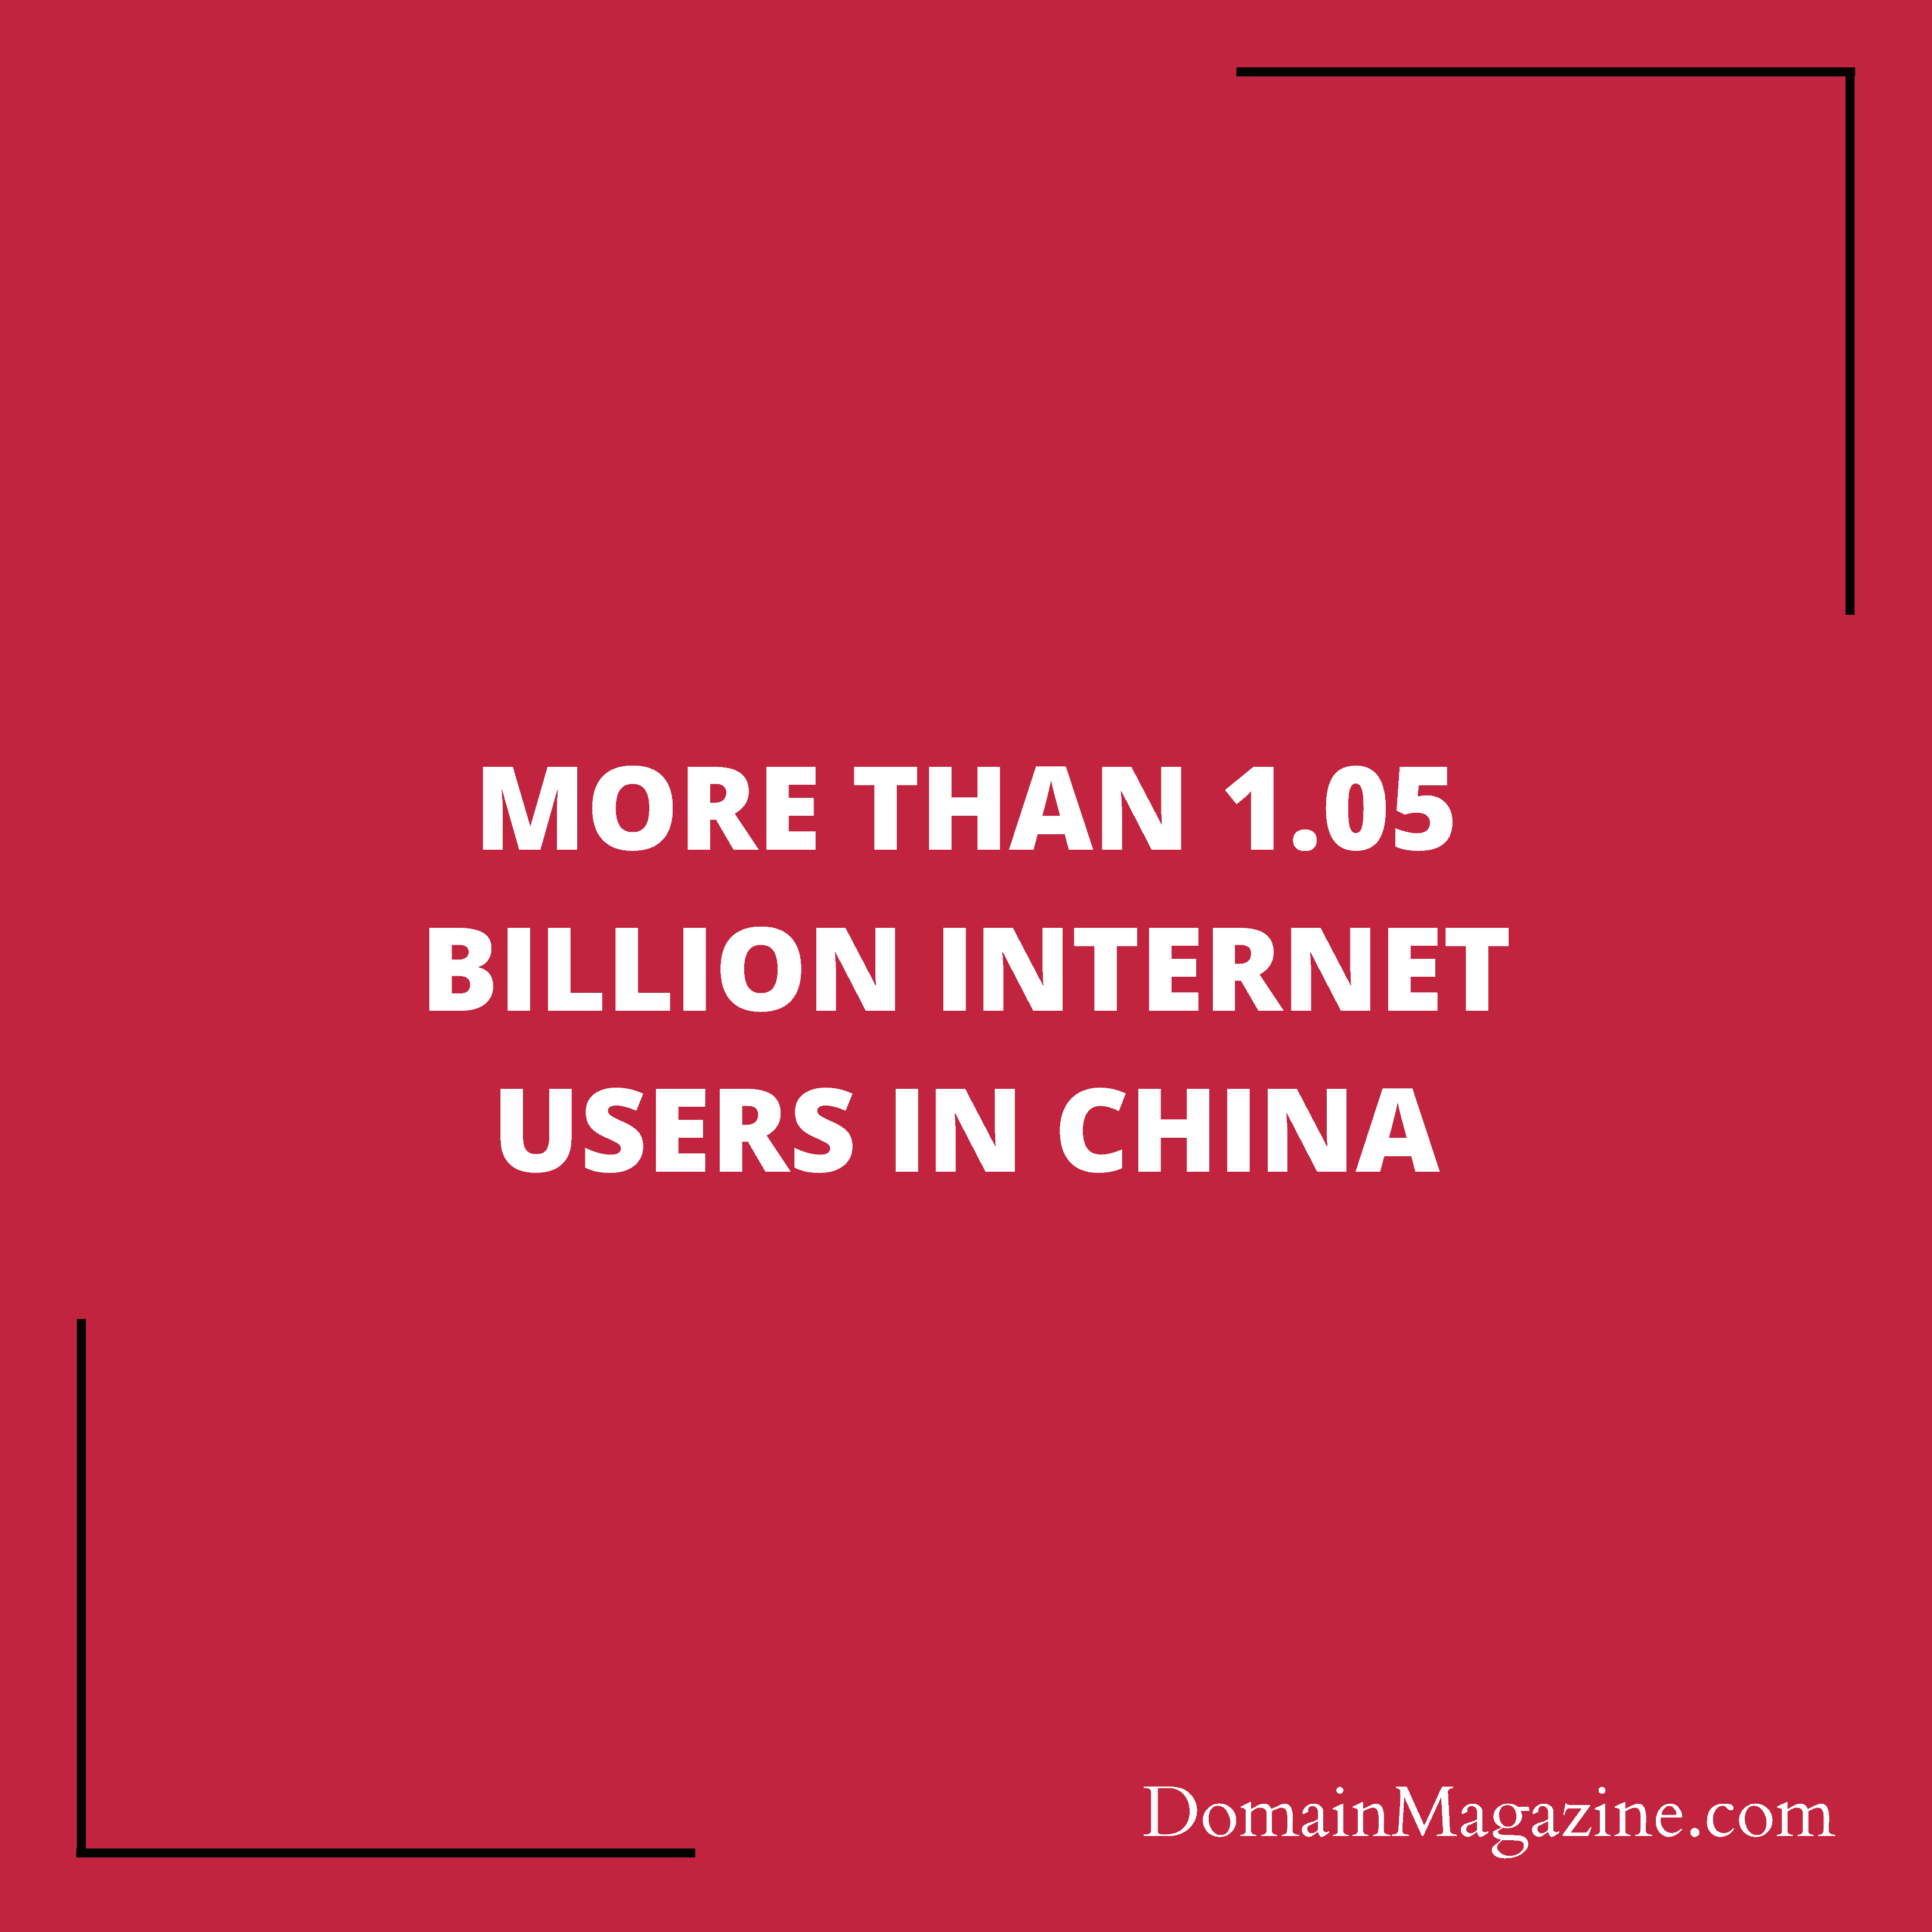 More than 1.05 billion internet users in China